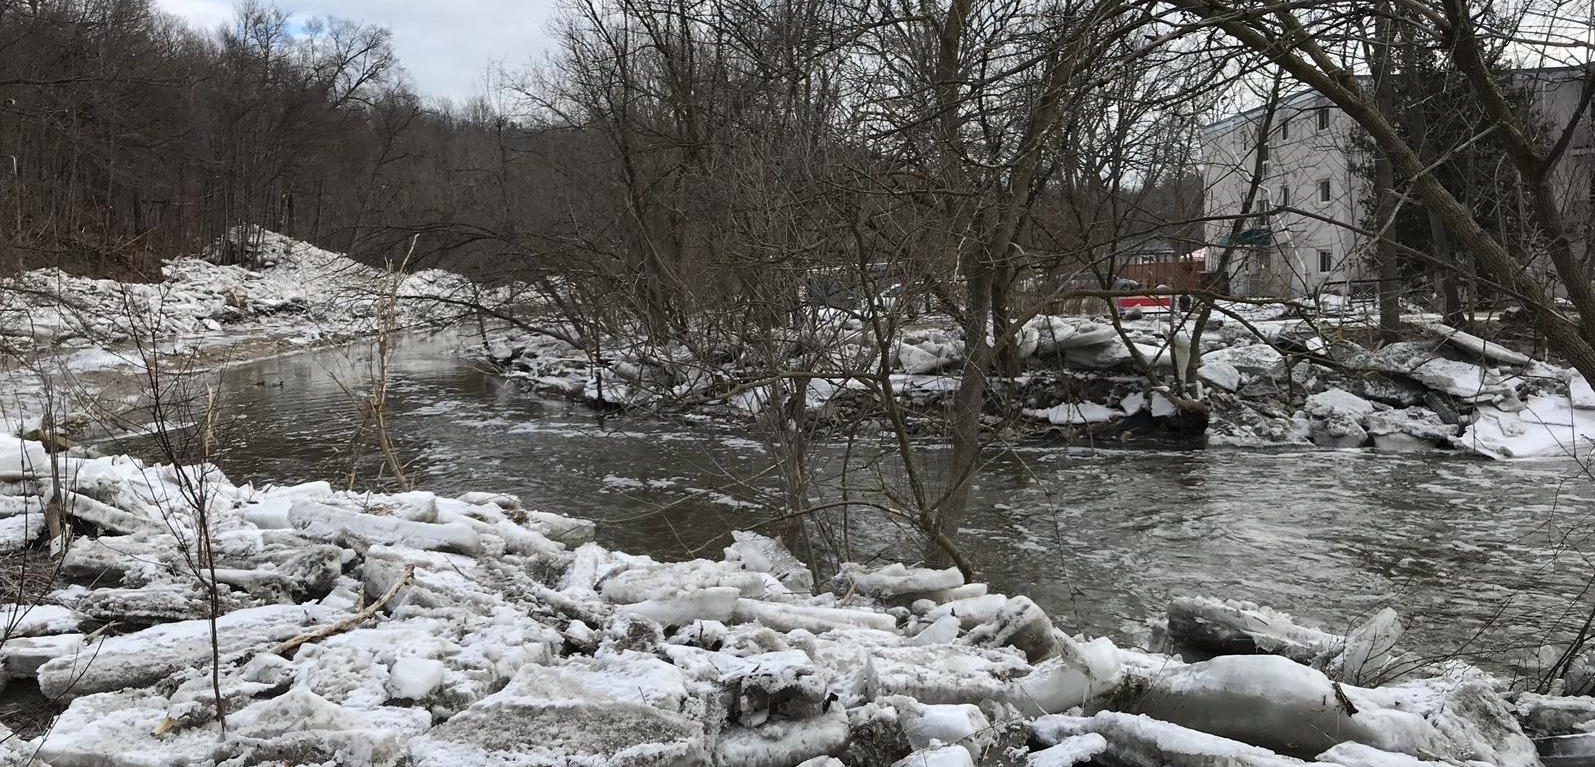 image after flood event in Bolton shows Humber River clear of ice